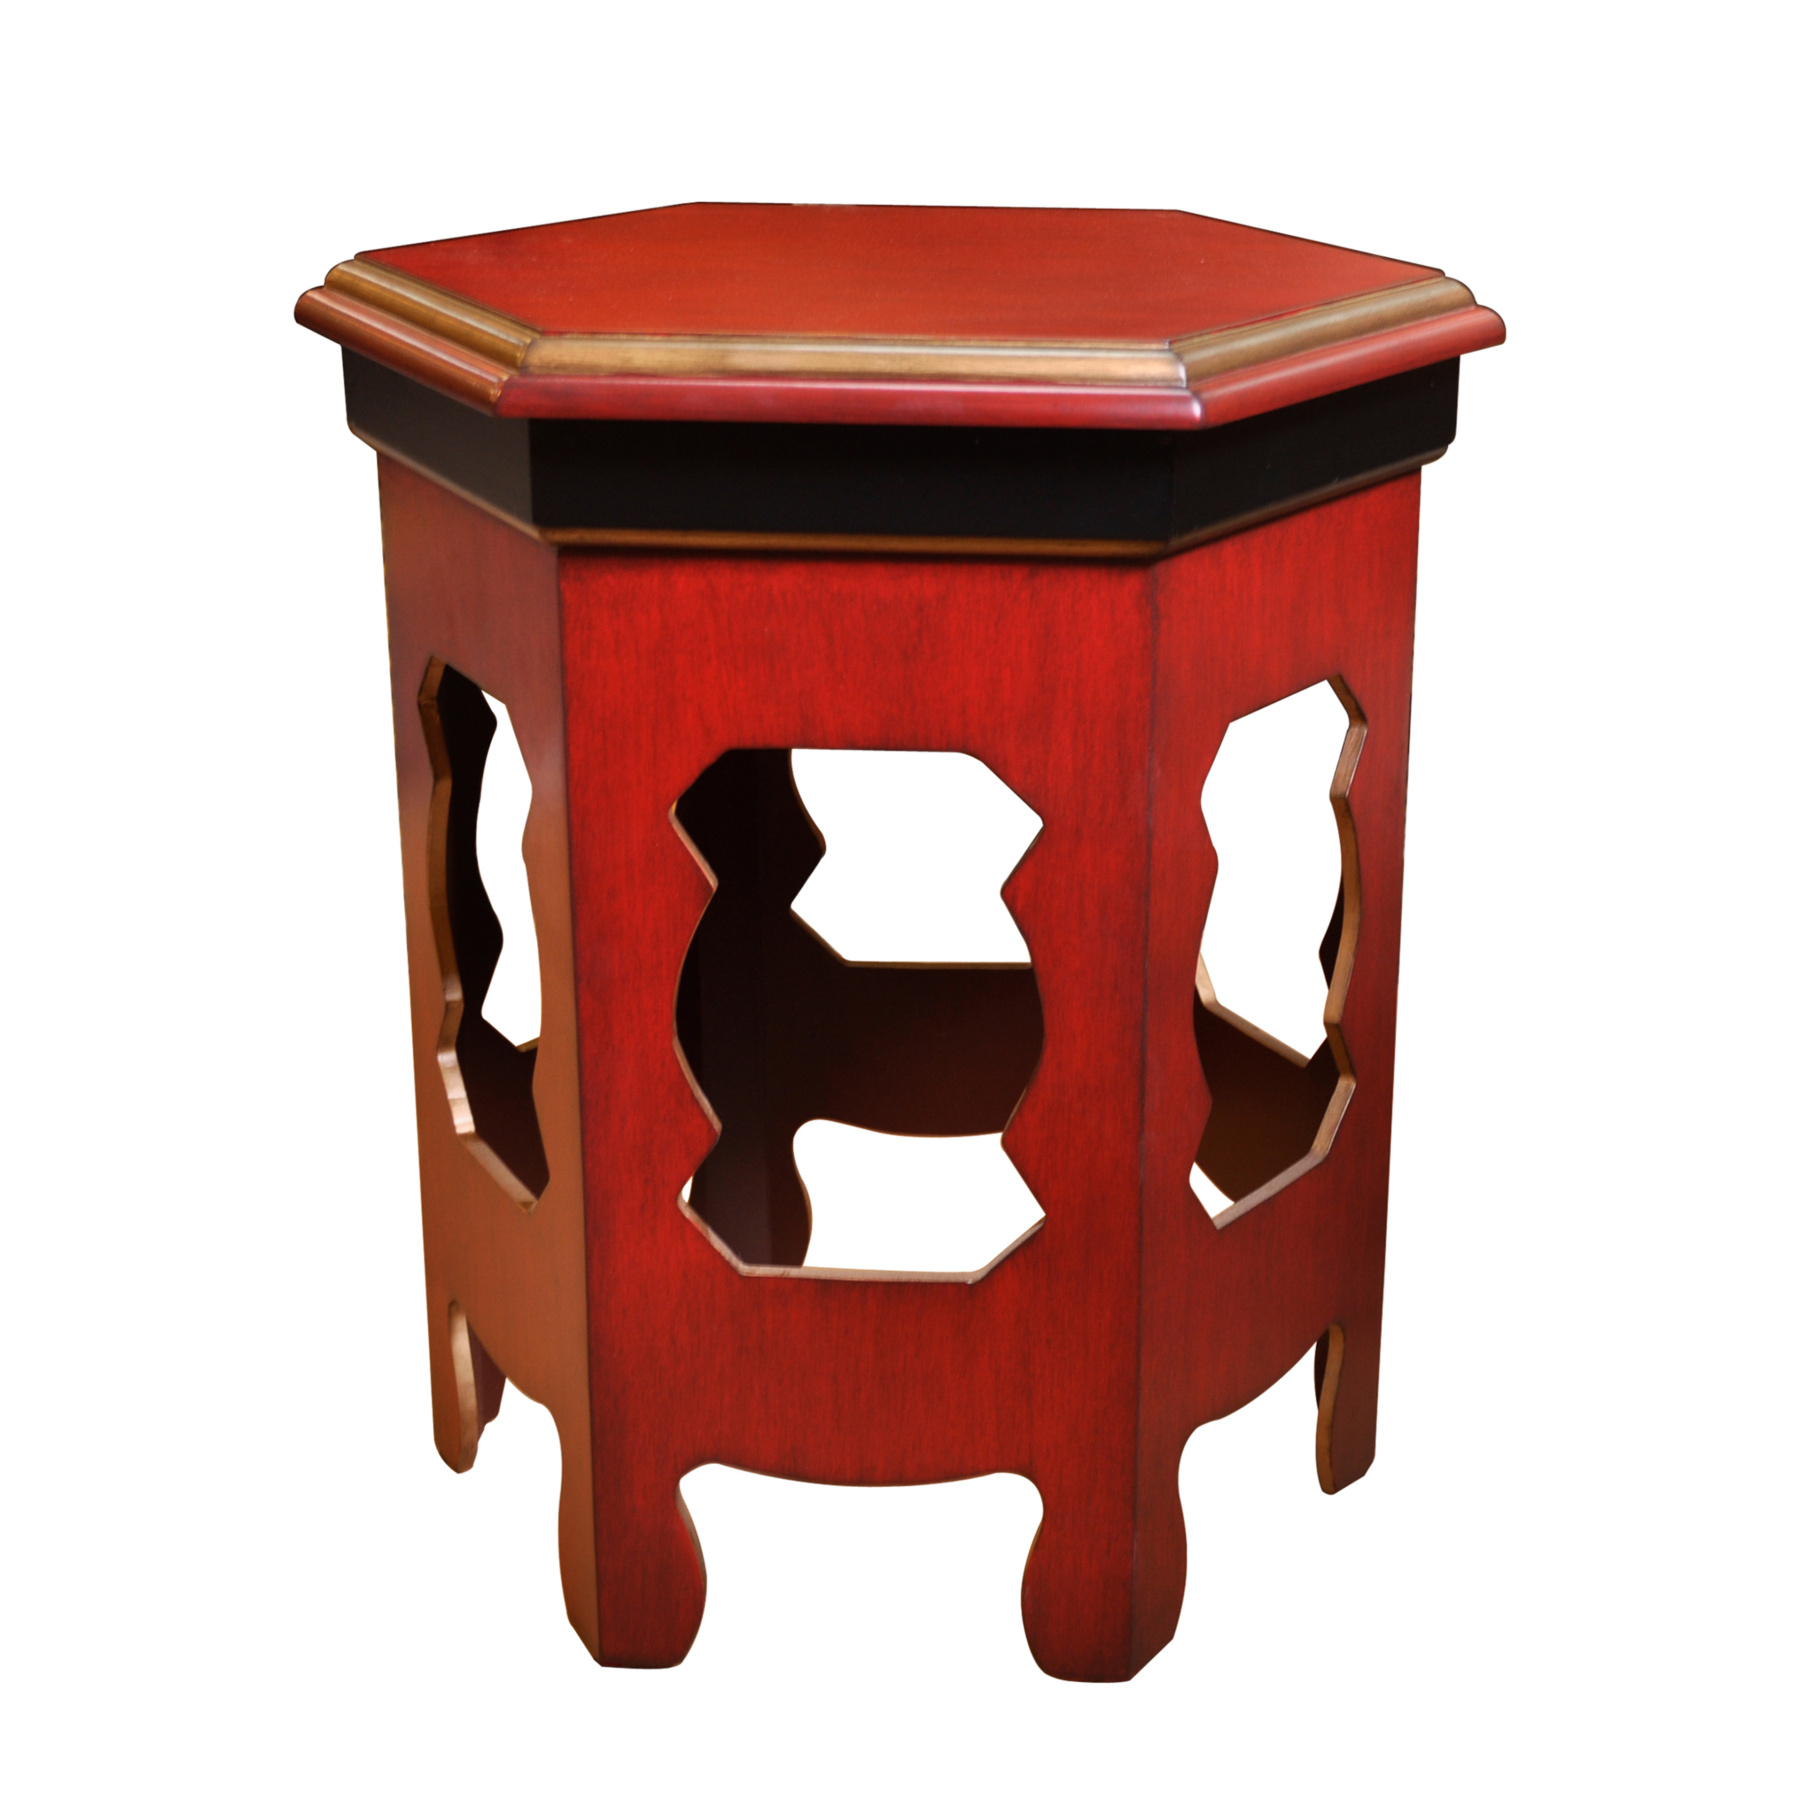 evan red accent table tables colors mosaic zeckos odelon distressed finish inches simplify oval decorative accessories for dining room teak folding garden storage solutions kids